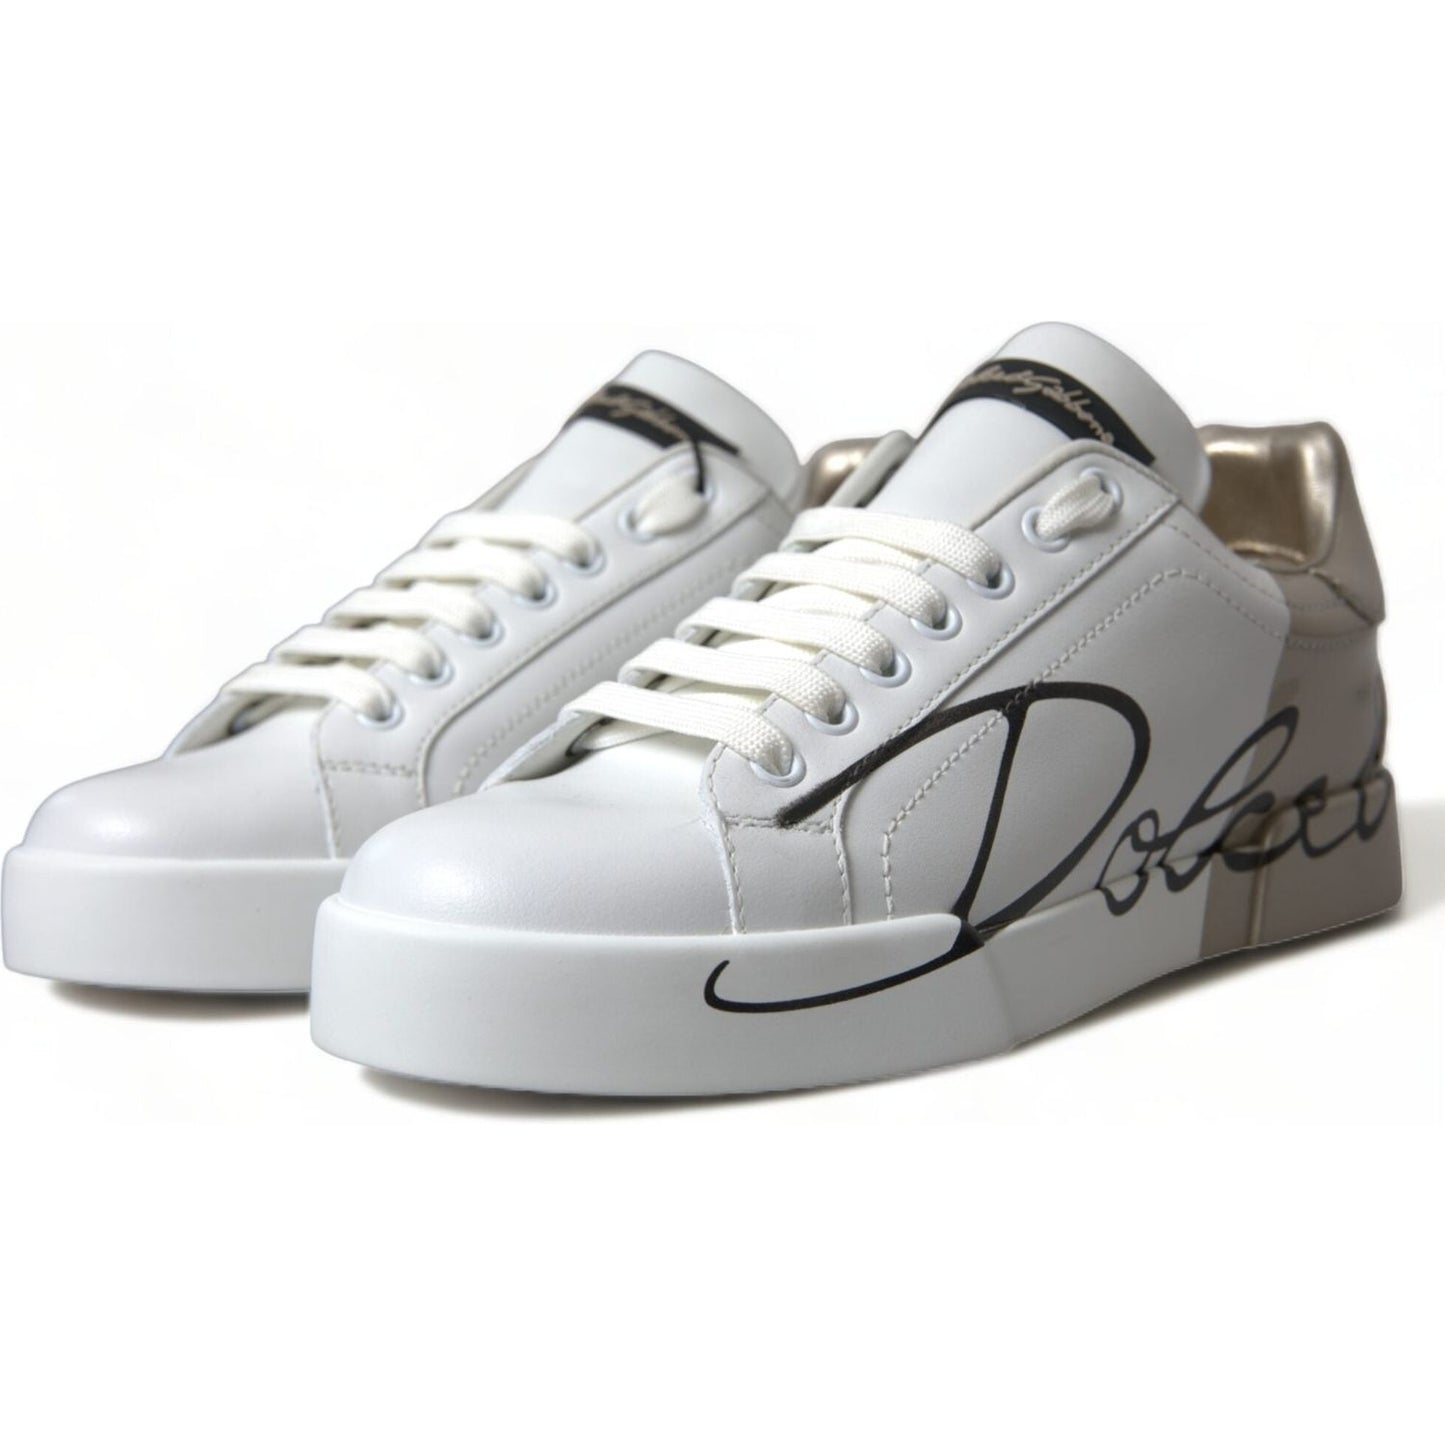 Dolce & Gabbana Elegant White & Gold Leather Sneakers white-gold-lace-up-womens-low-top-sneakers 465A2616-BG-scaled-67c35c93-00b.jpg